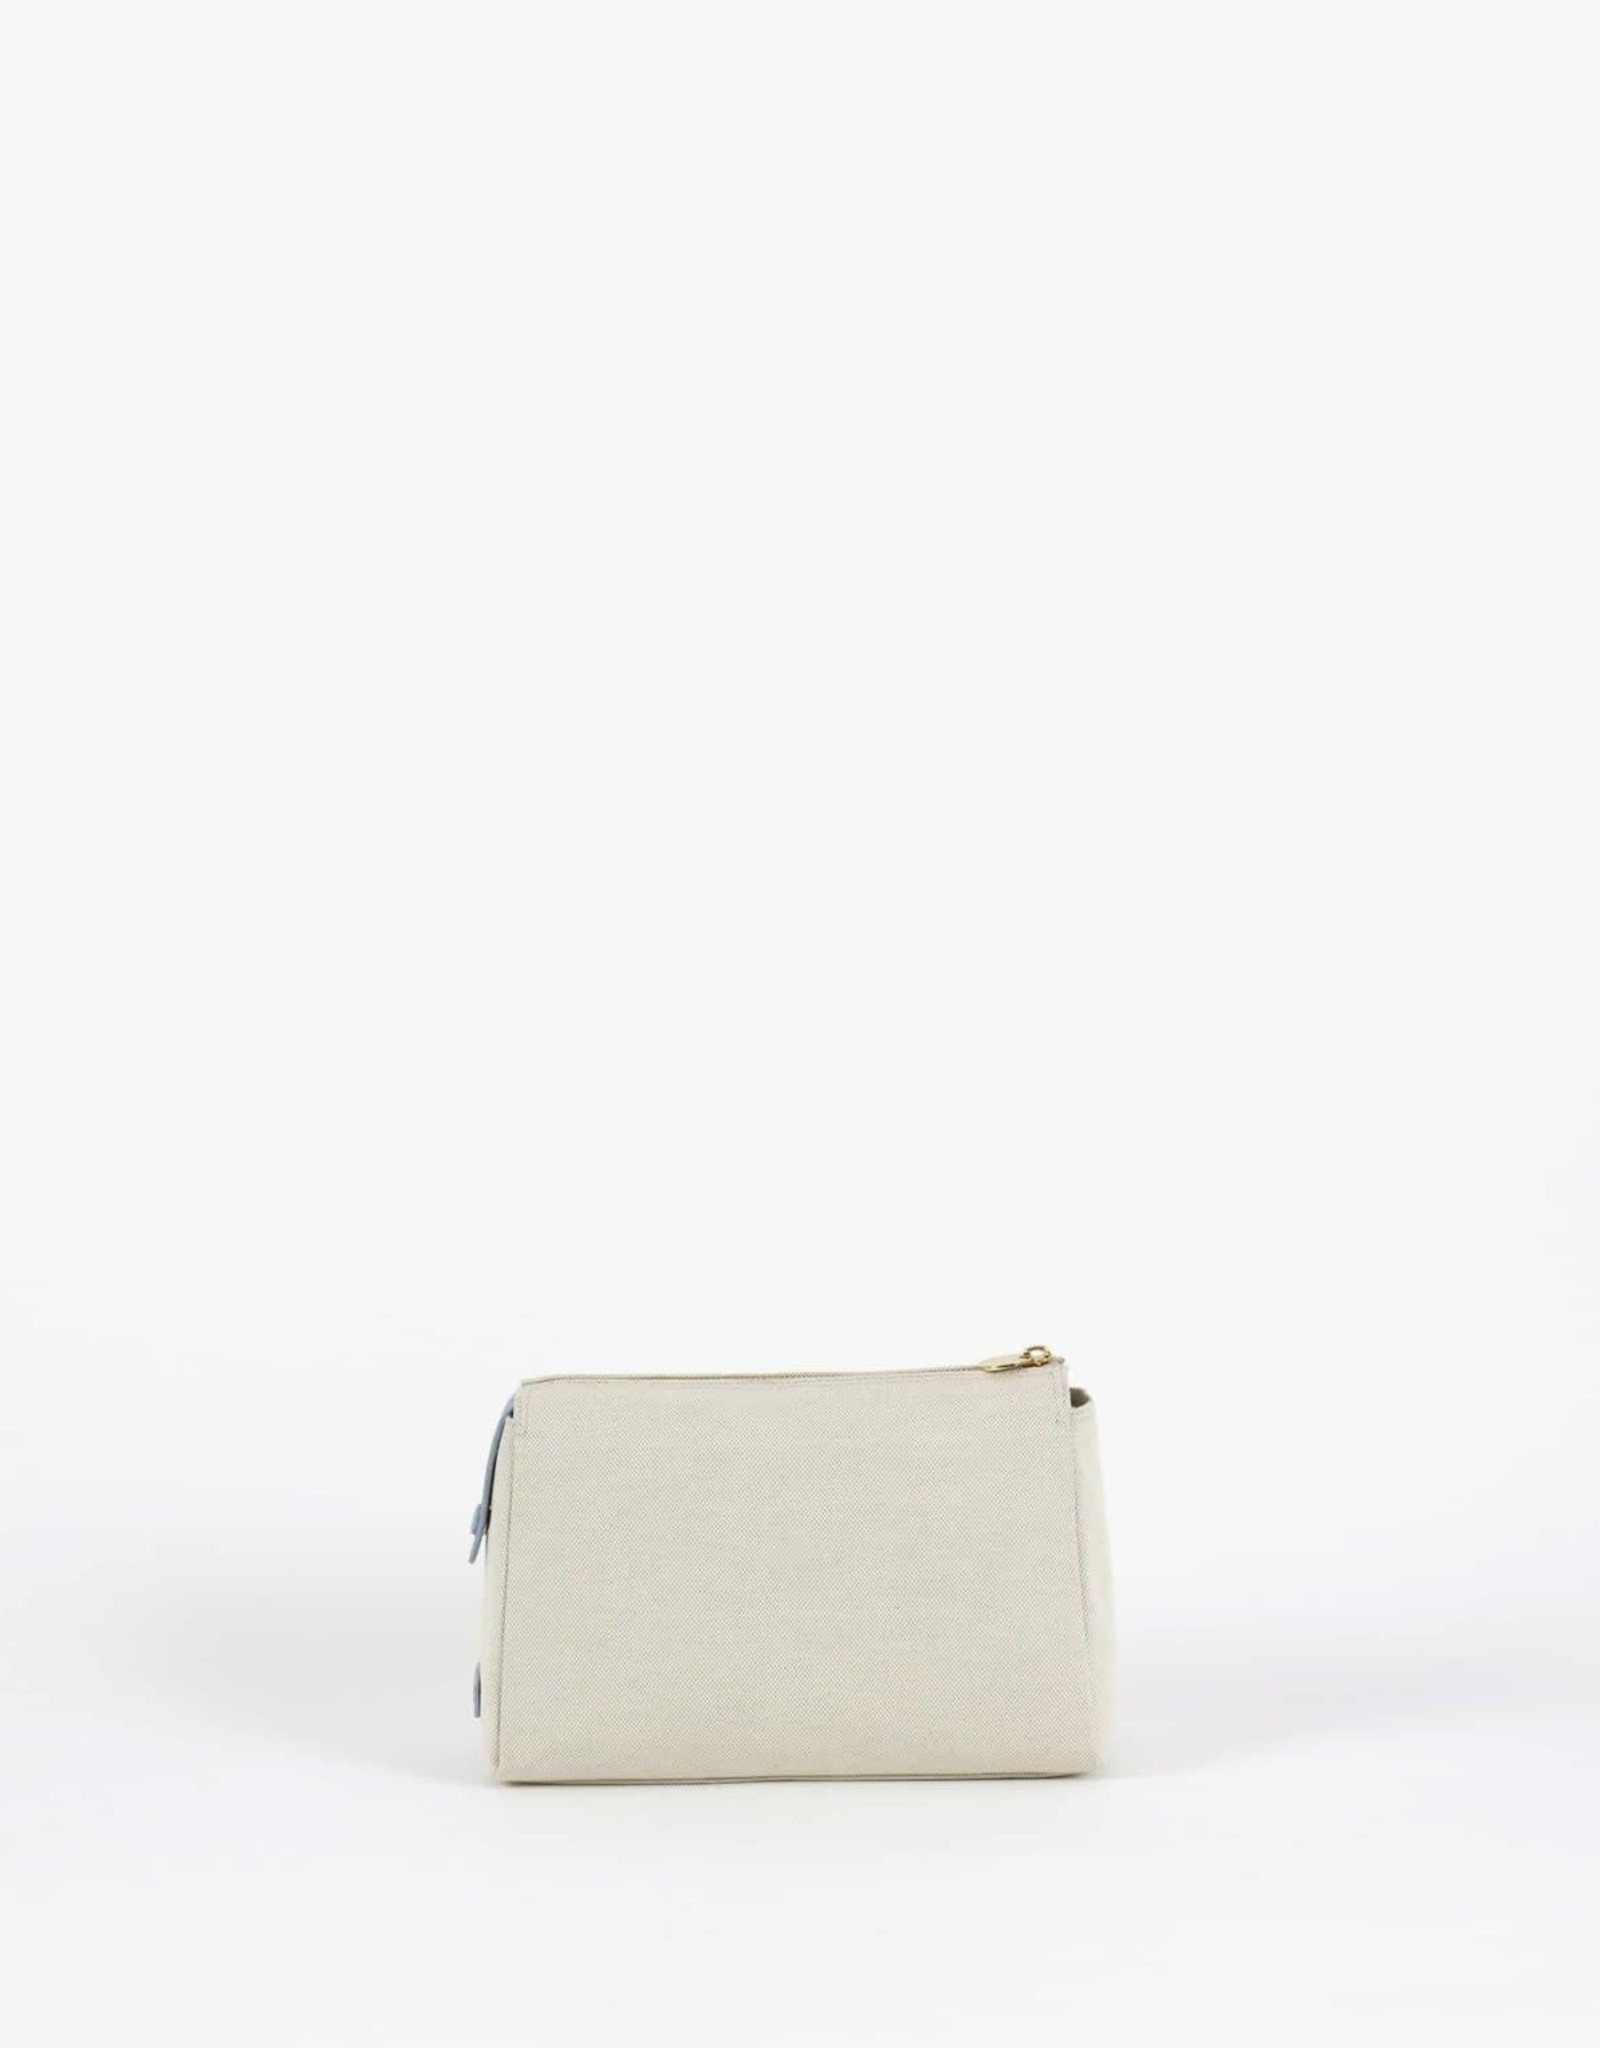 Neely & Chloe Canvas Pouch